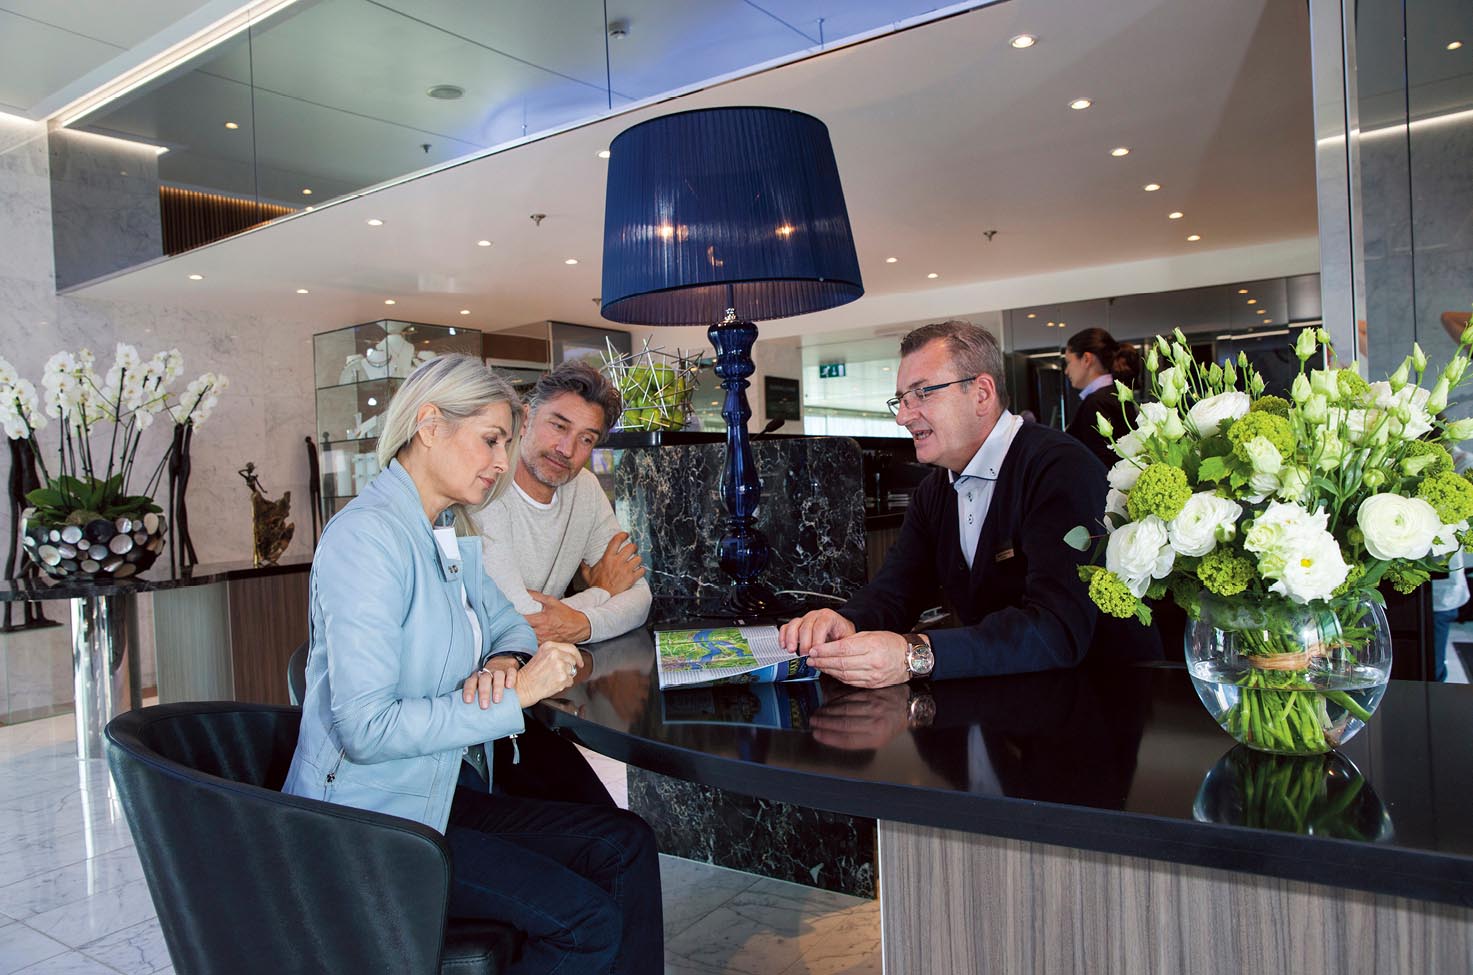 Guests speaking to Cruise Director on board Scenic Diamond in the reception area. 